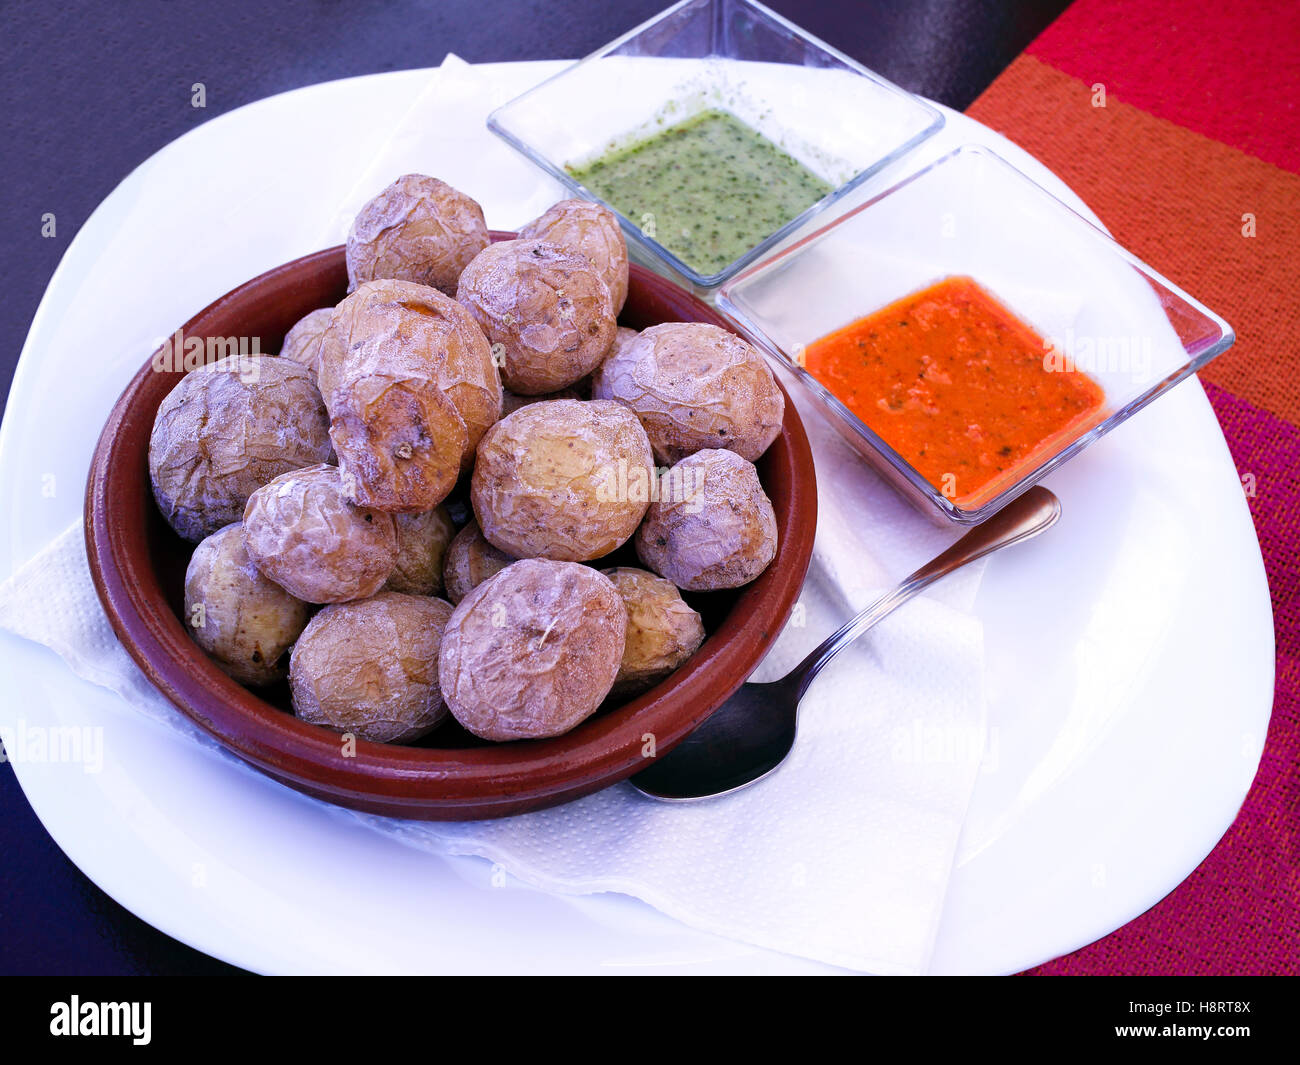 bowl of baked potatoes in skins served with spicy pepper and cilantro sauce Stock Photo